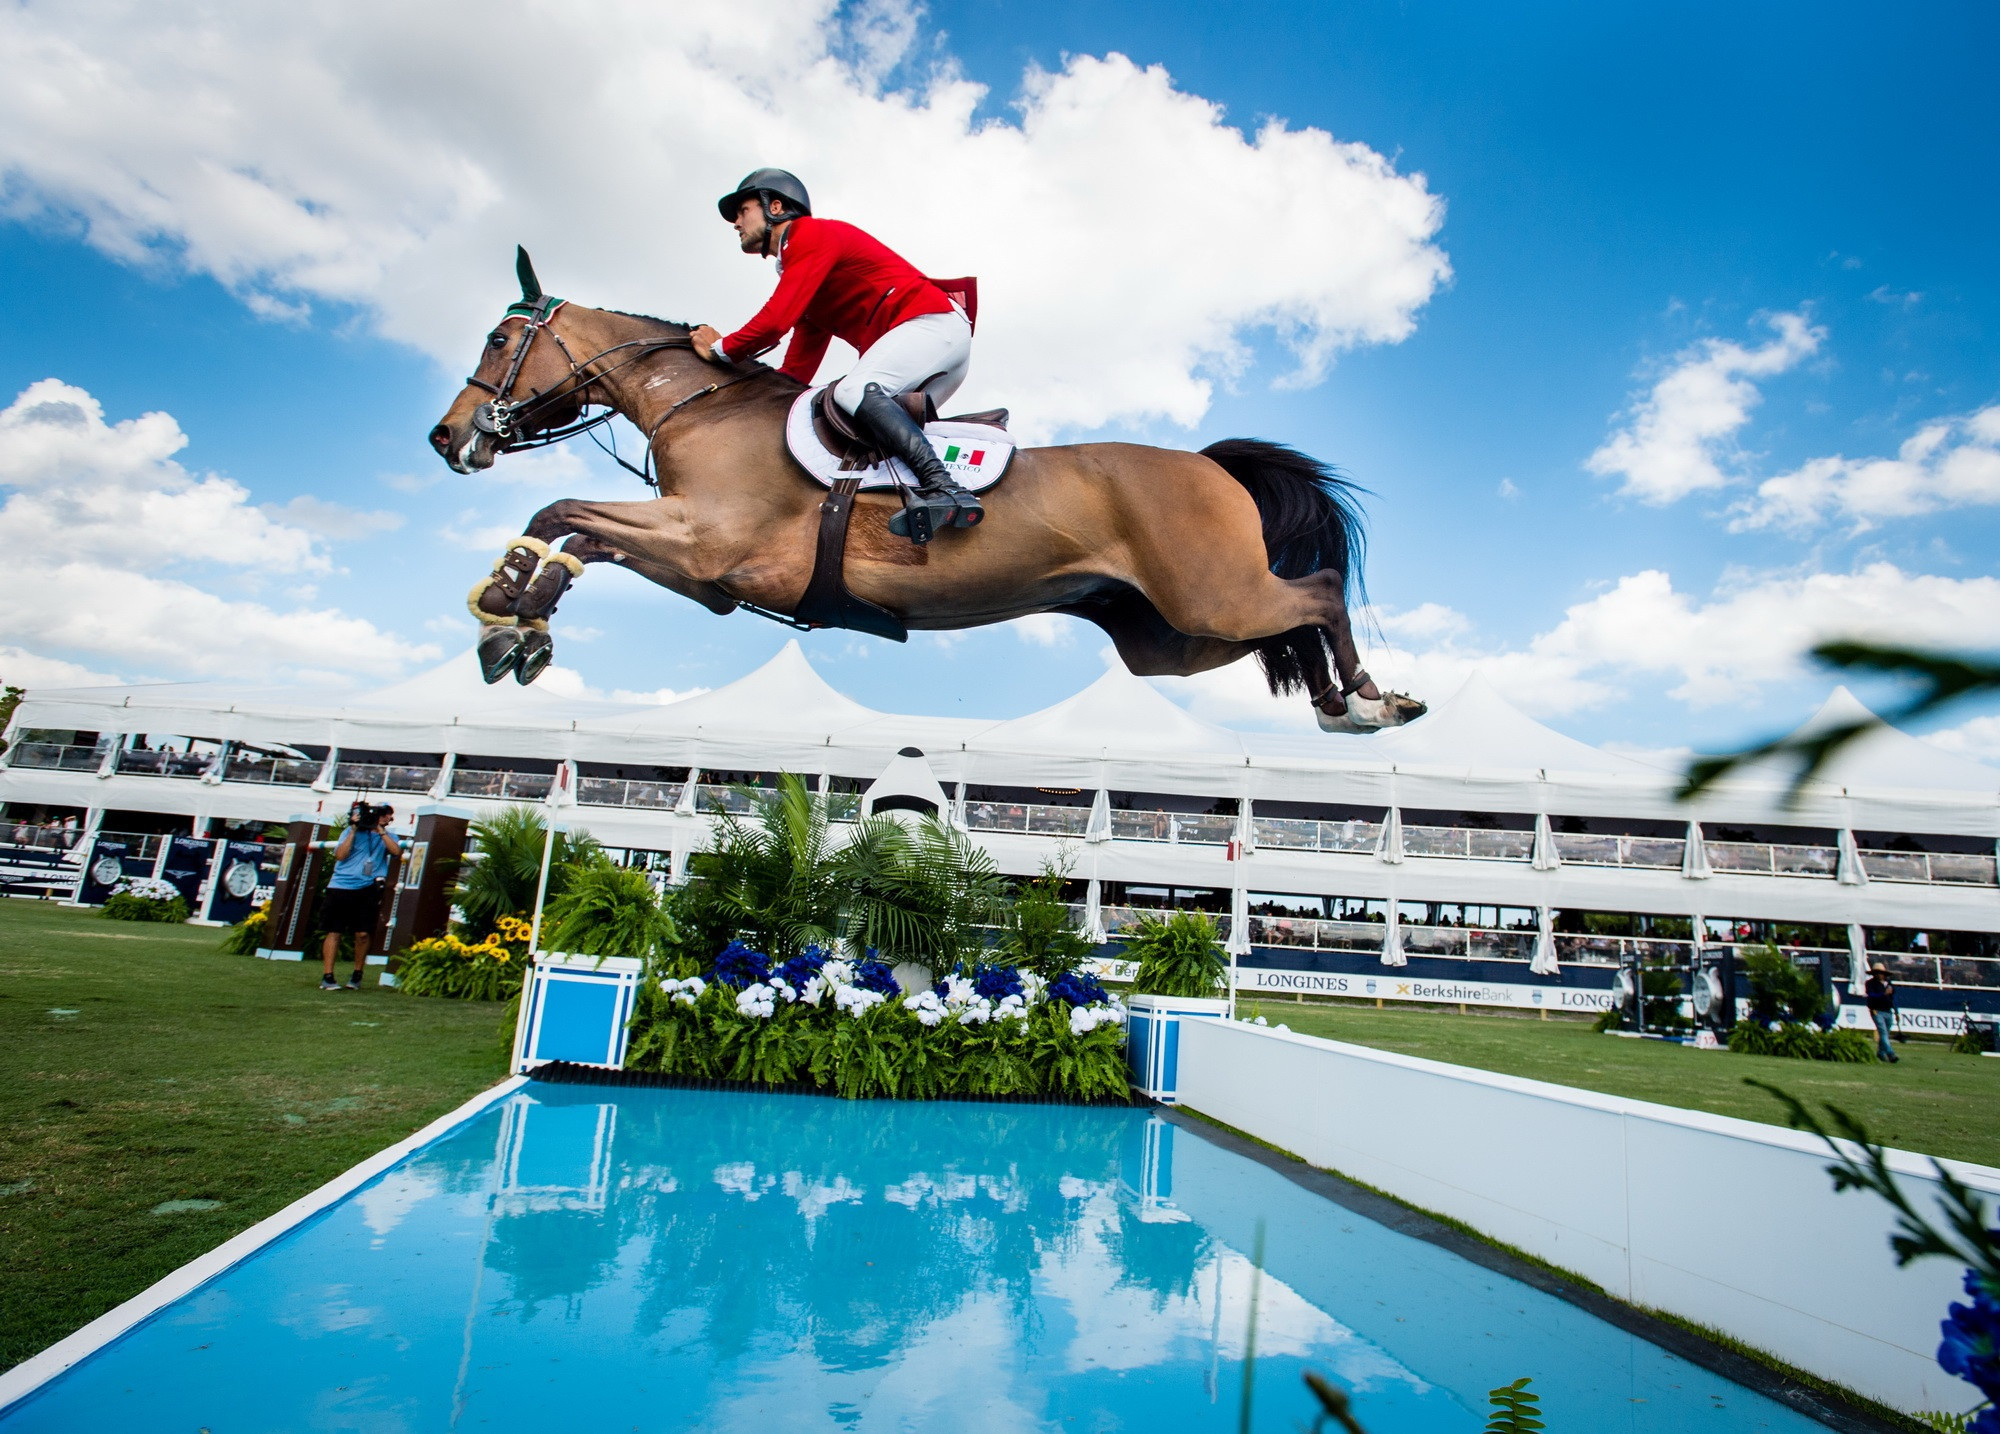 Mexico triumph at opening FEI Jumping Nations Cup of season